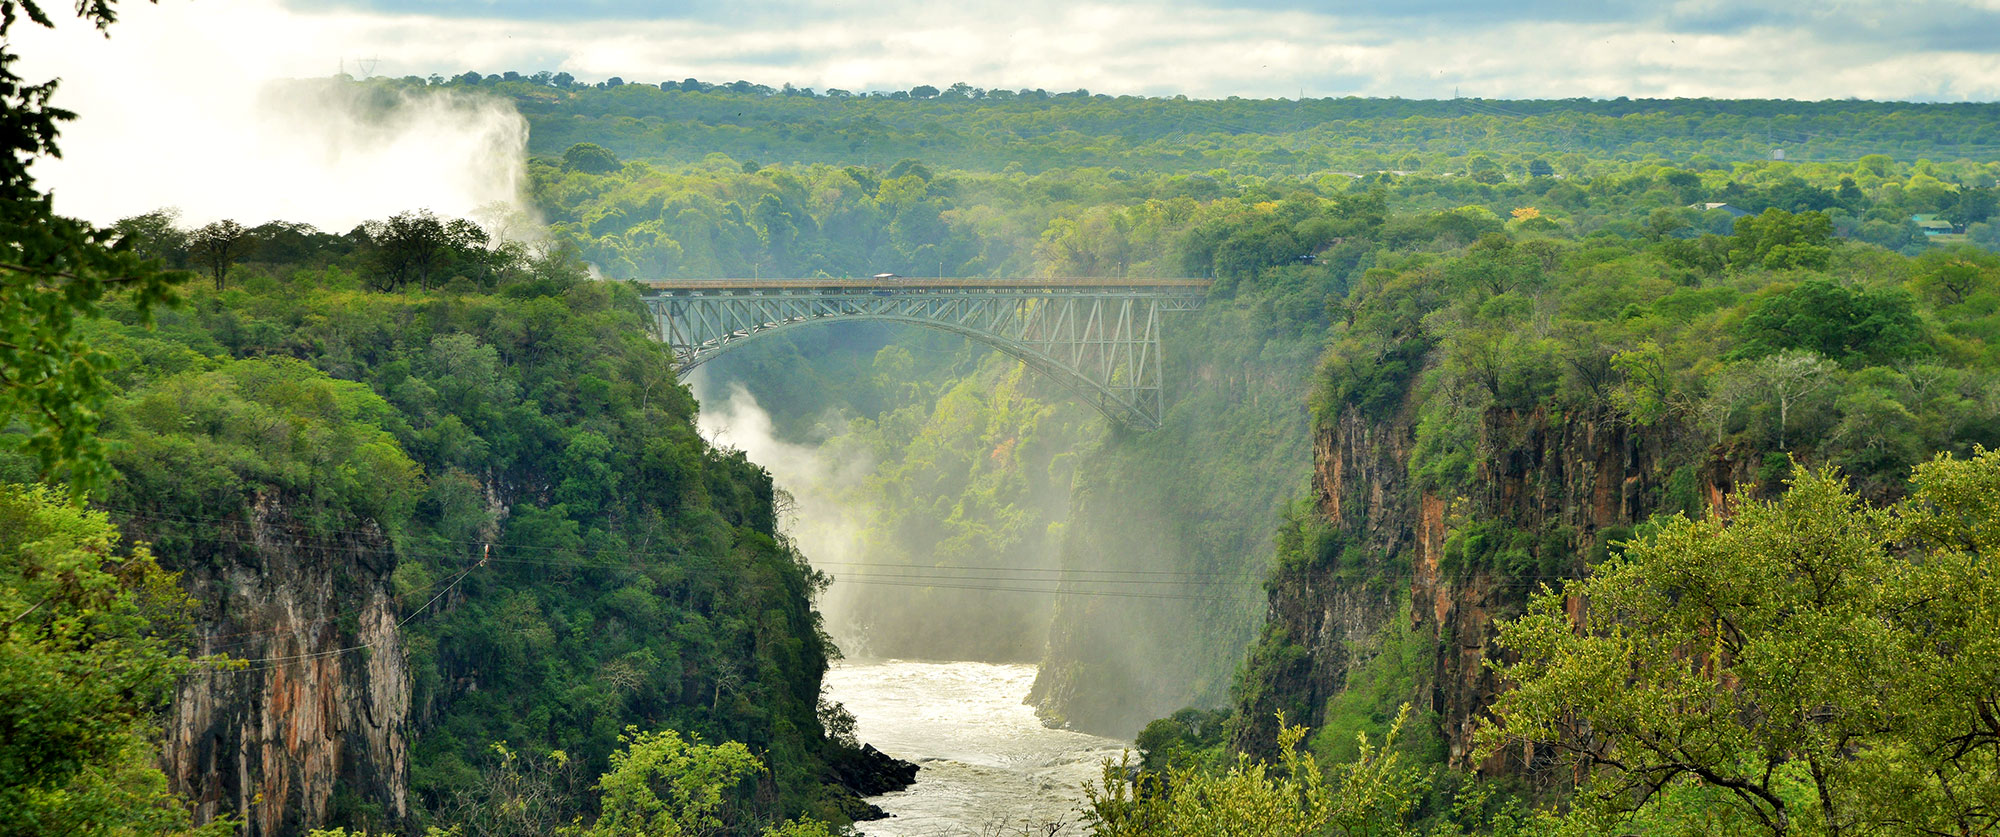 African Travel Packages - Victoria Falls Hotel